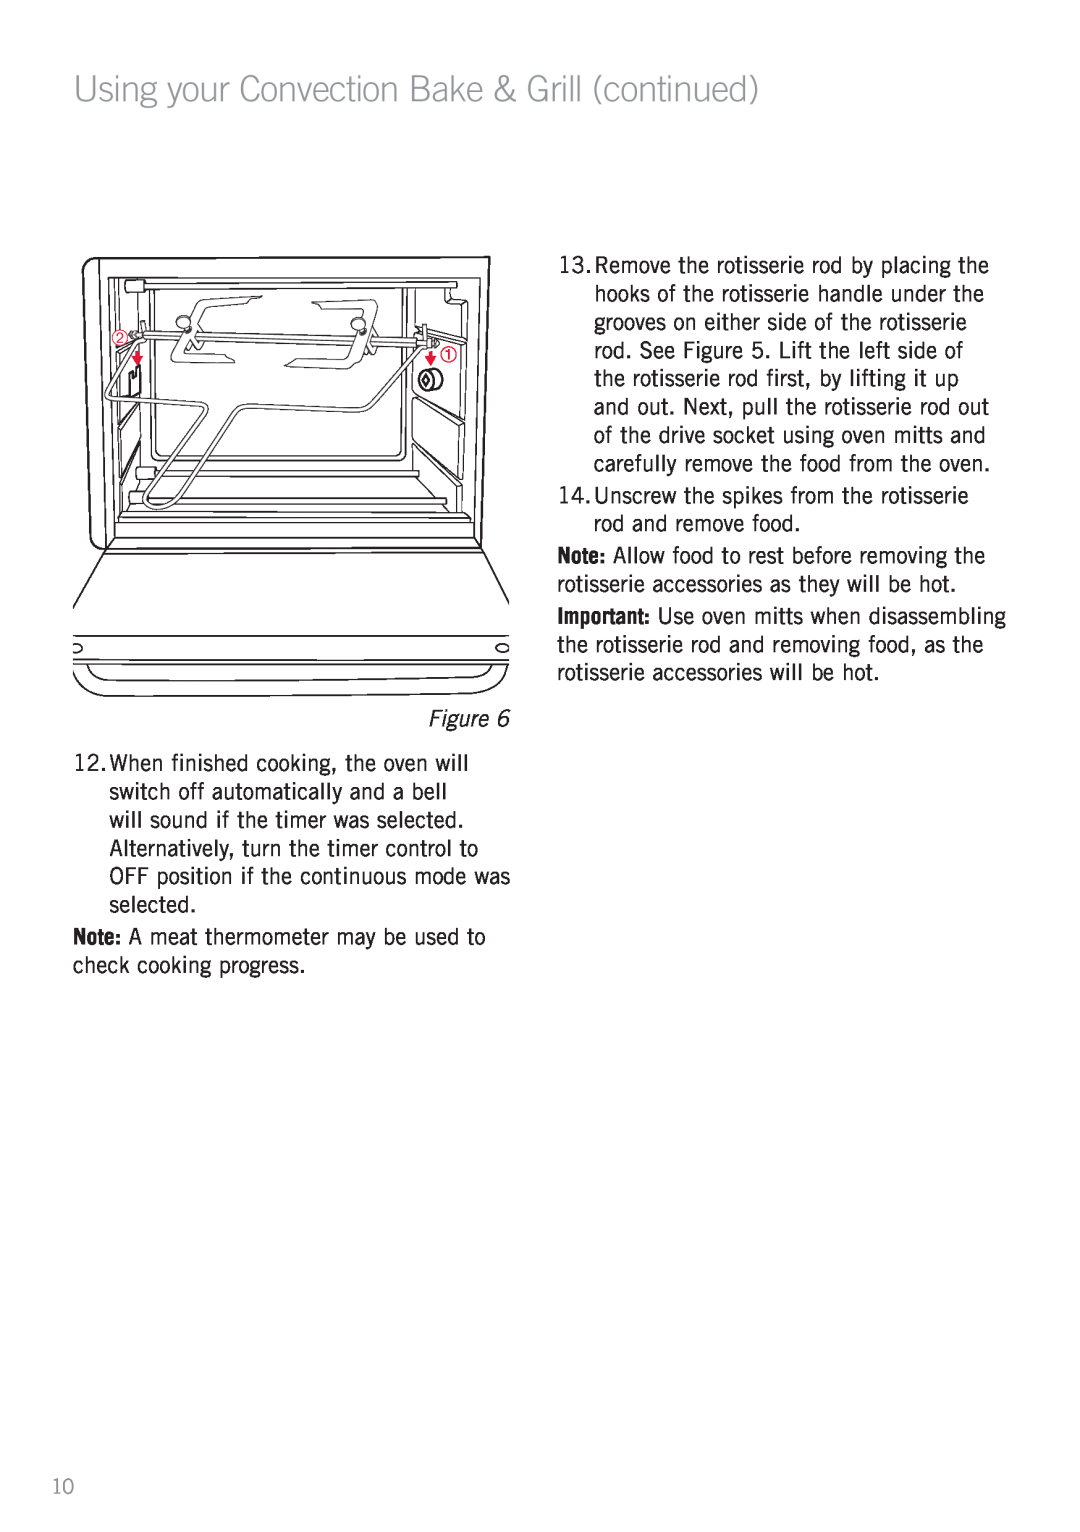 Sunbeam BT7000 Using your Convection Bake & Grill continued, Note A meat thermometer may be used to check cooking progress 